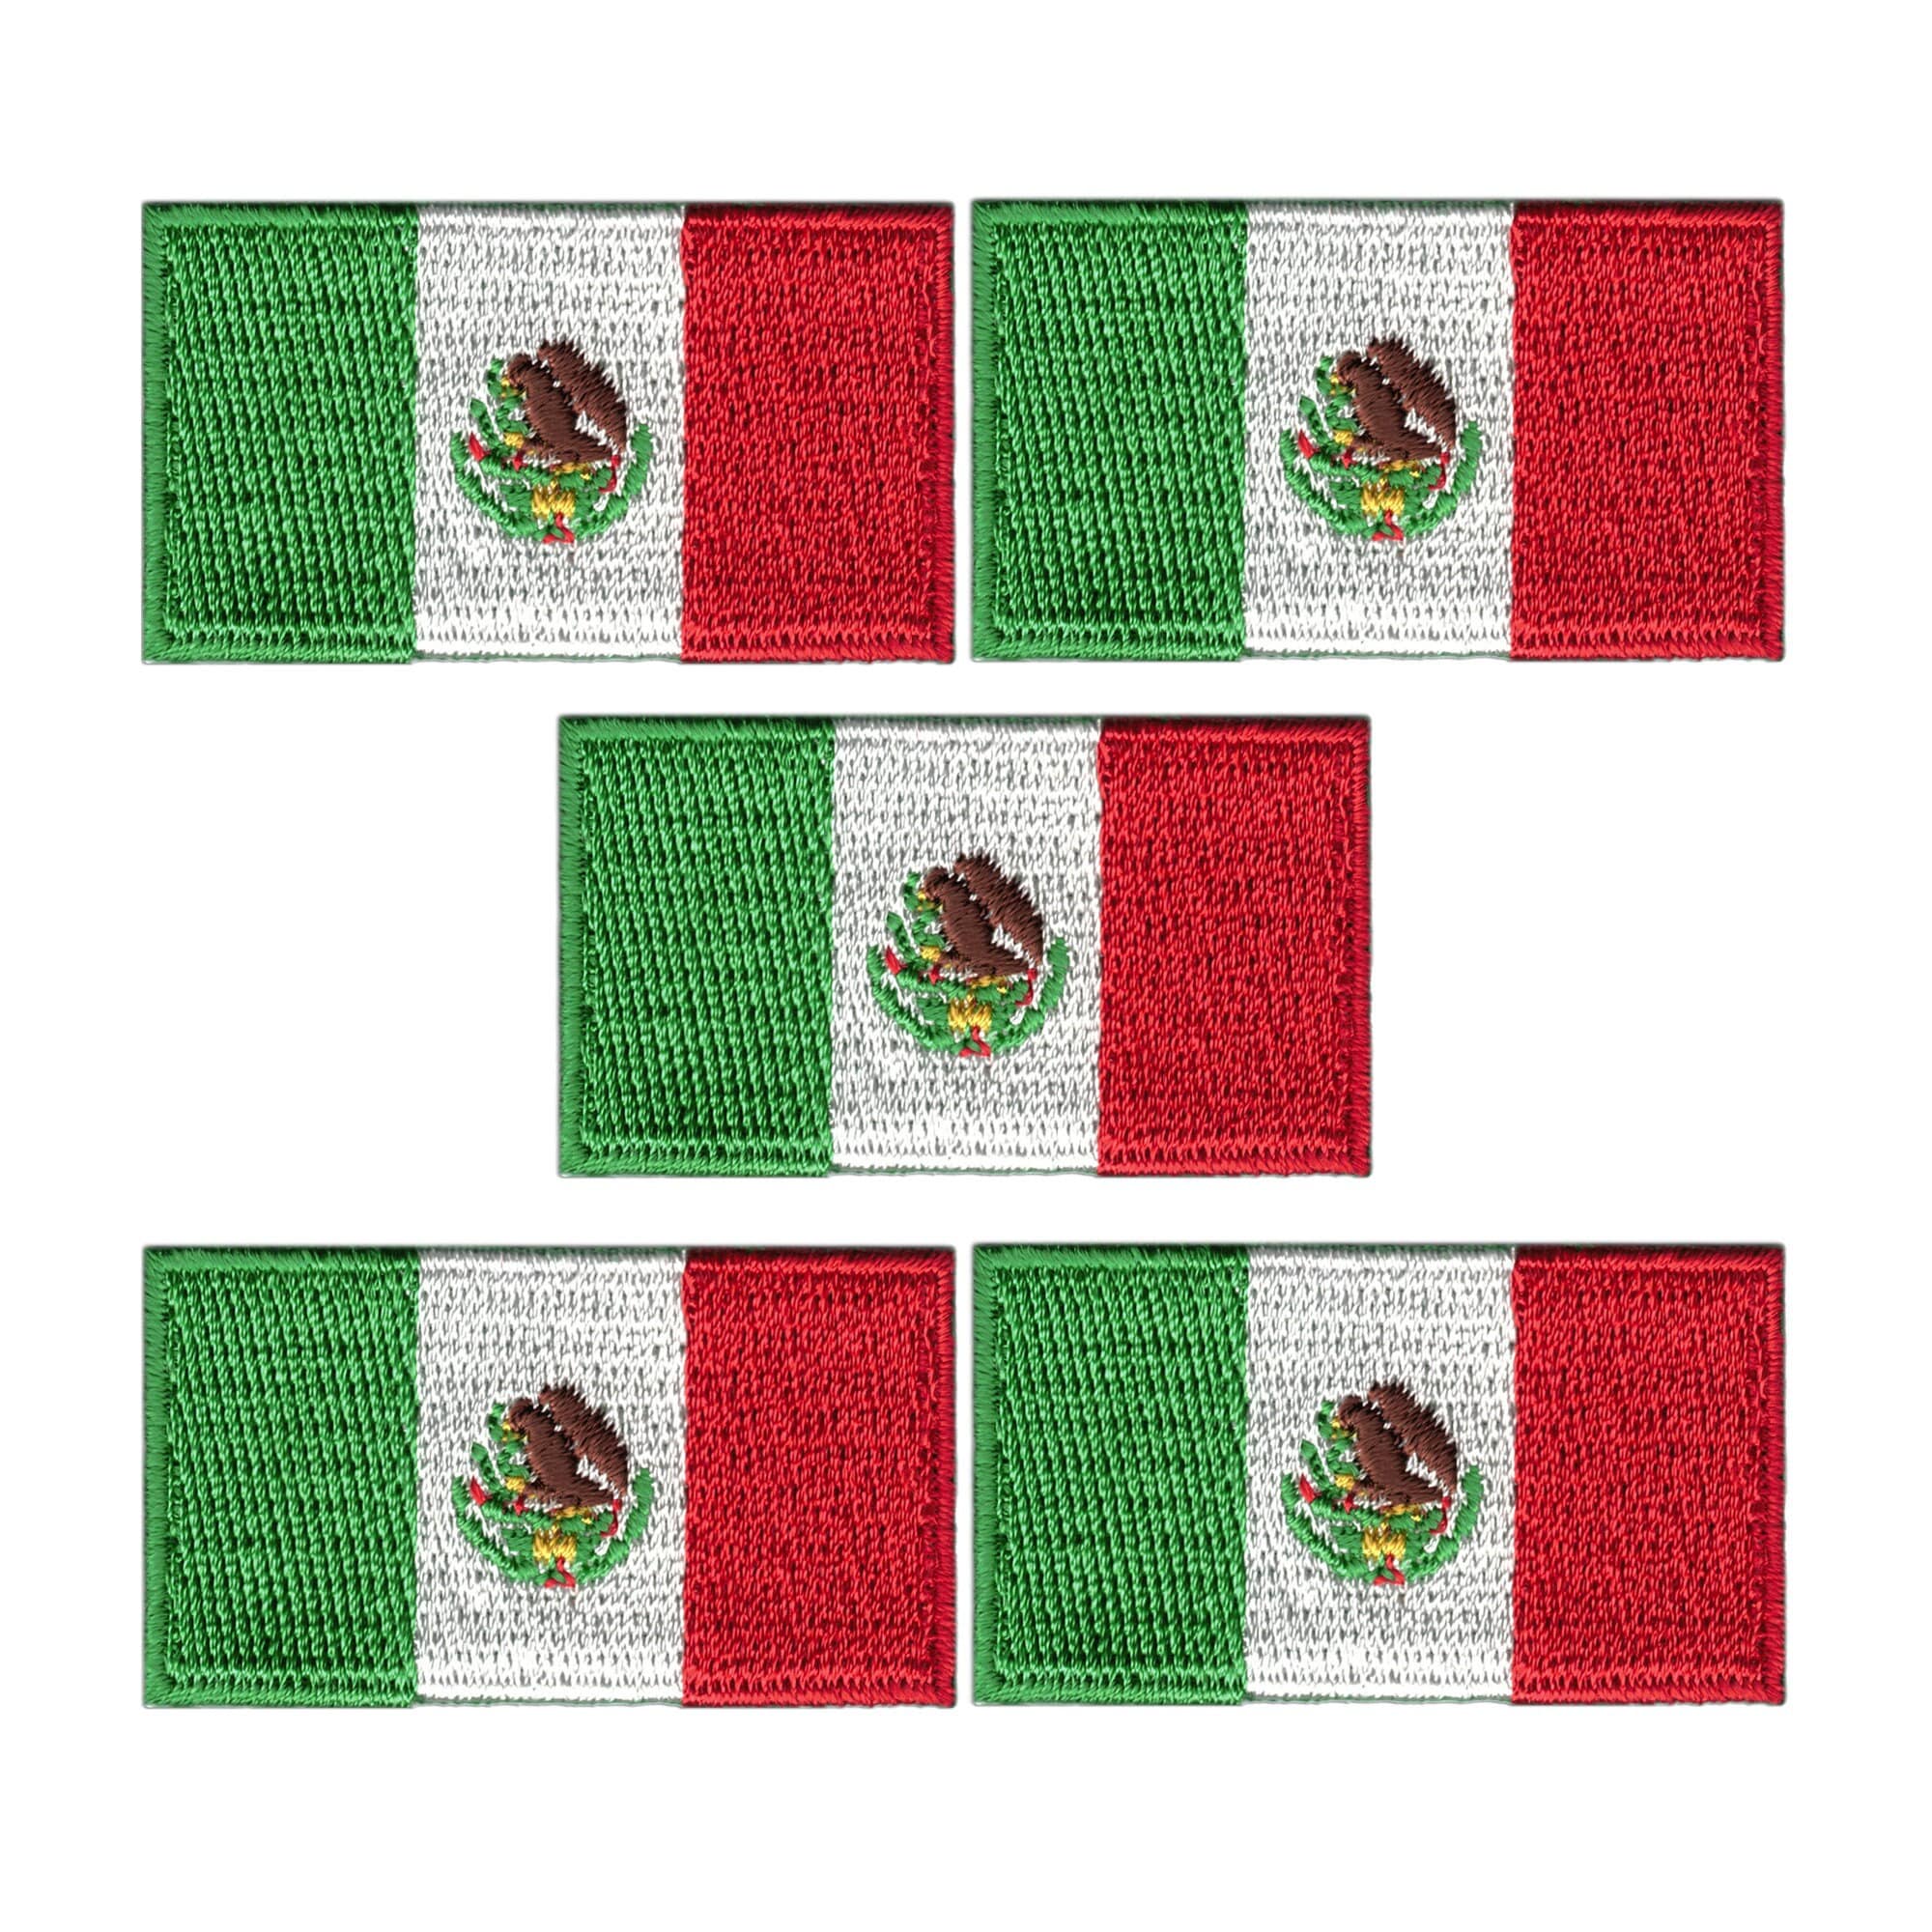 Mexico Flag, Mexican National Flag w/Gold Border/Iron On Patch Applique